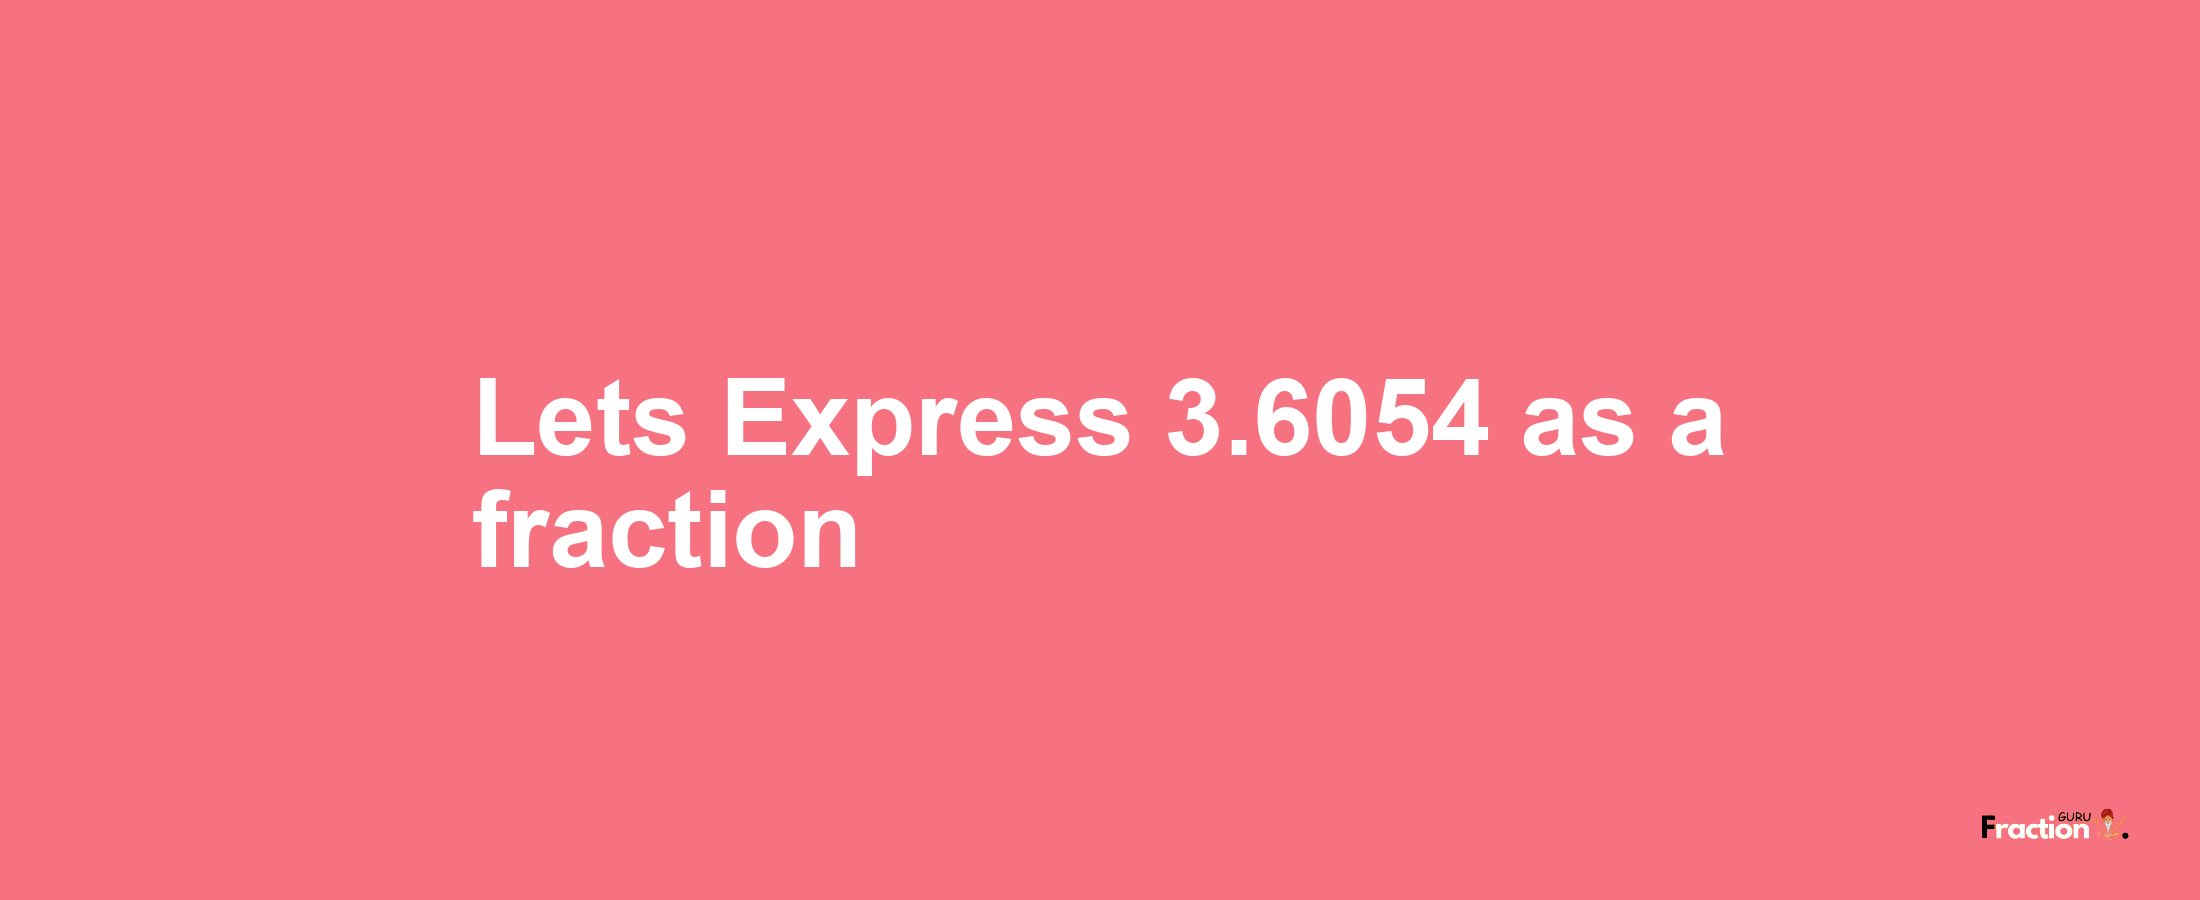 Lets Express 3.6054 as afraction